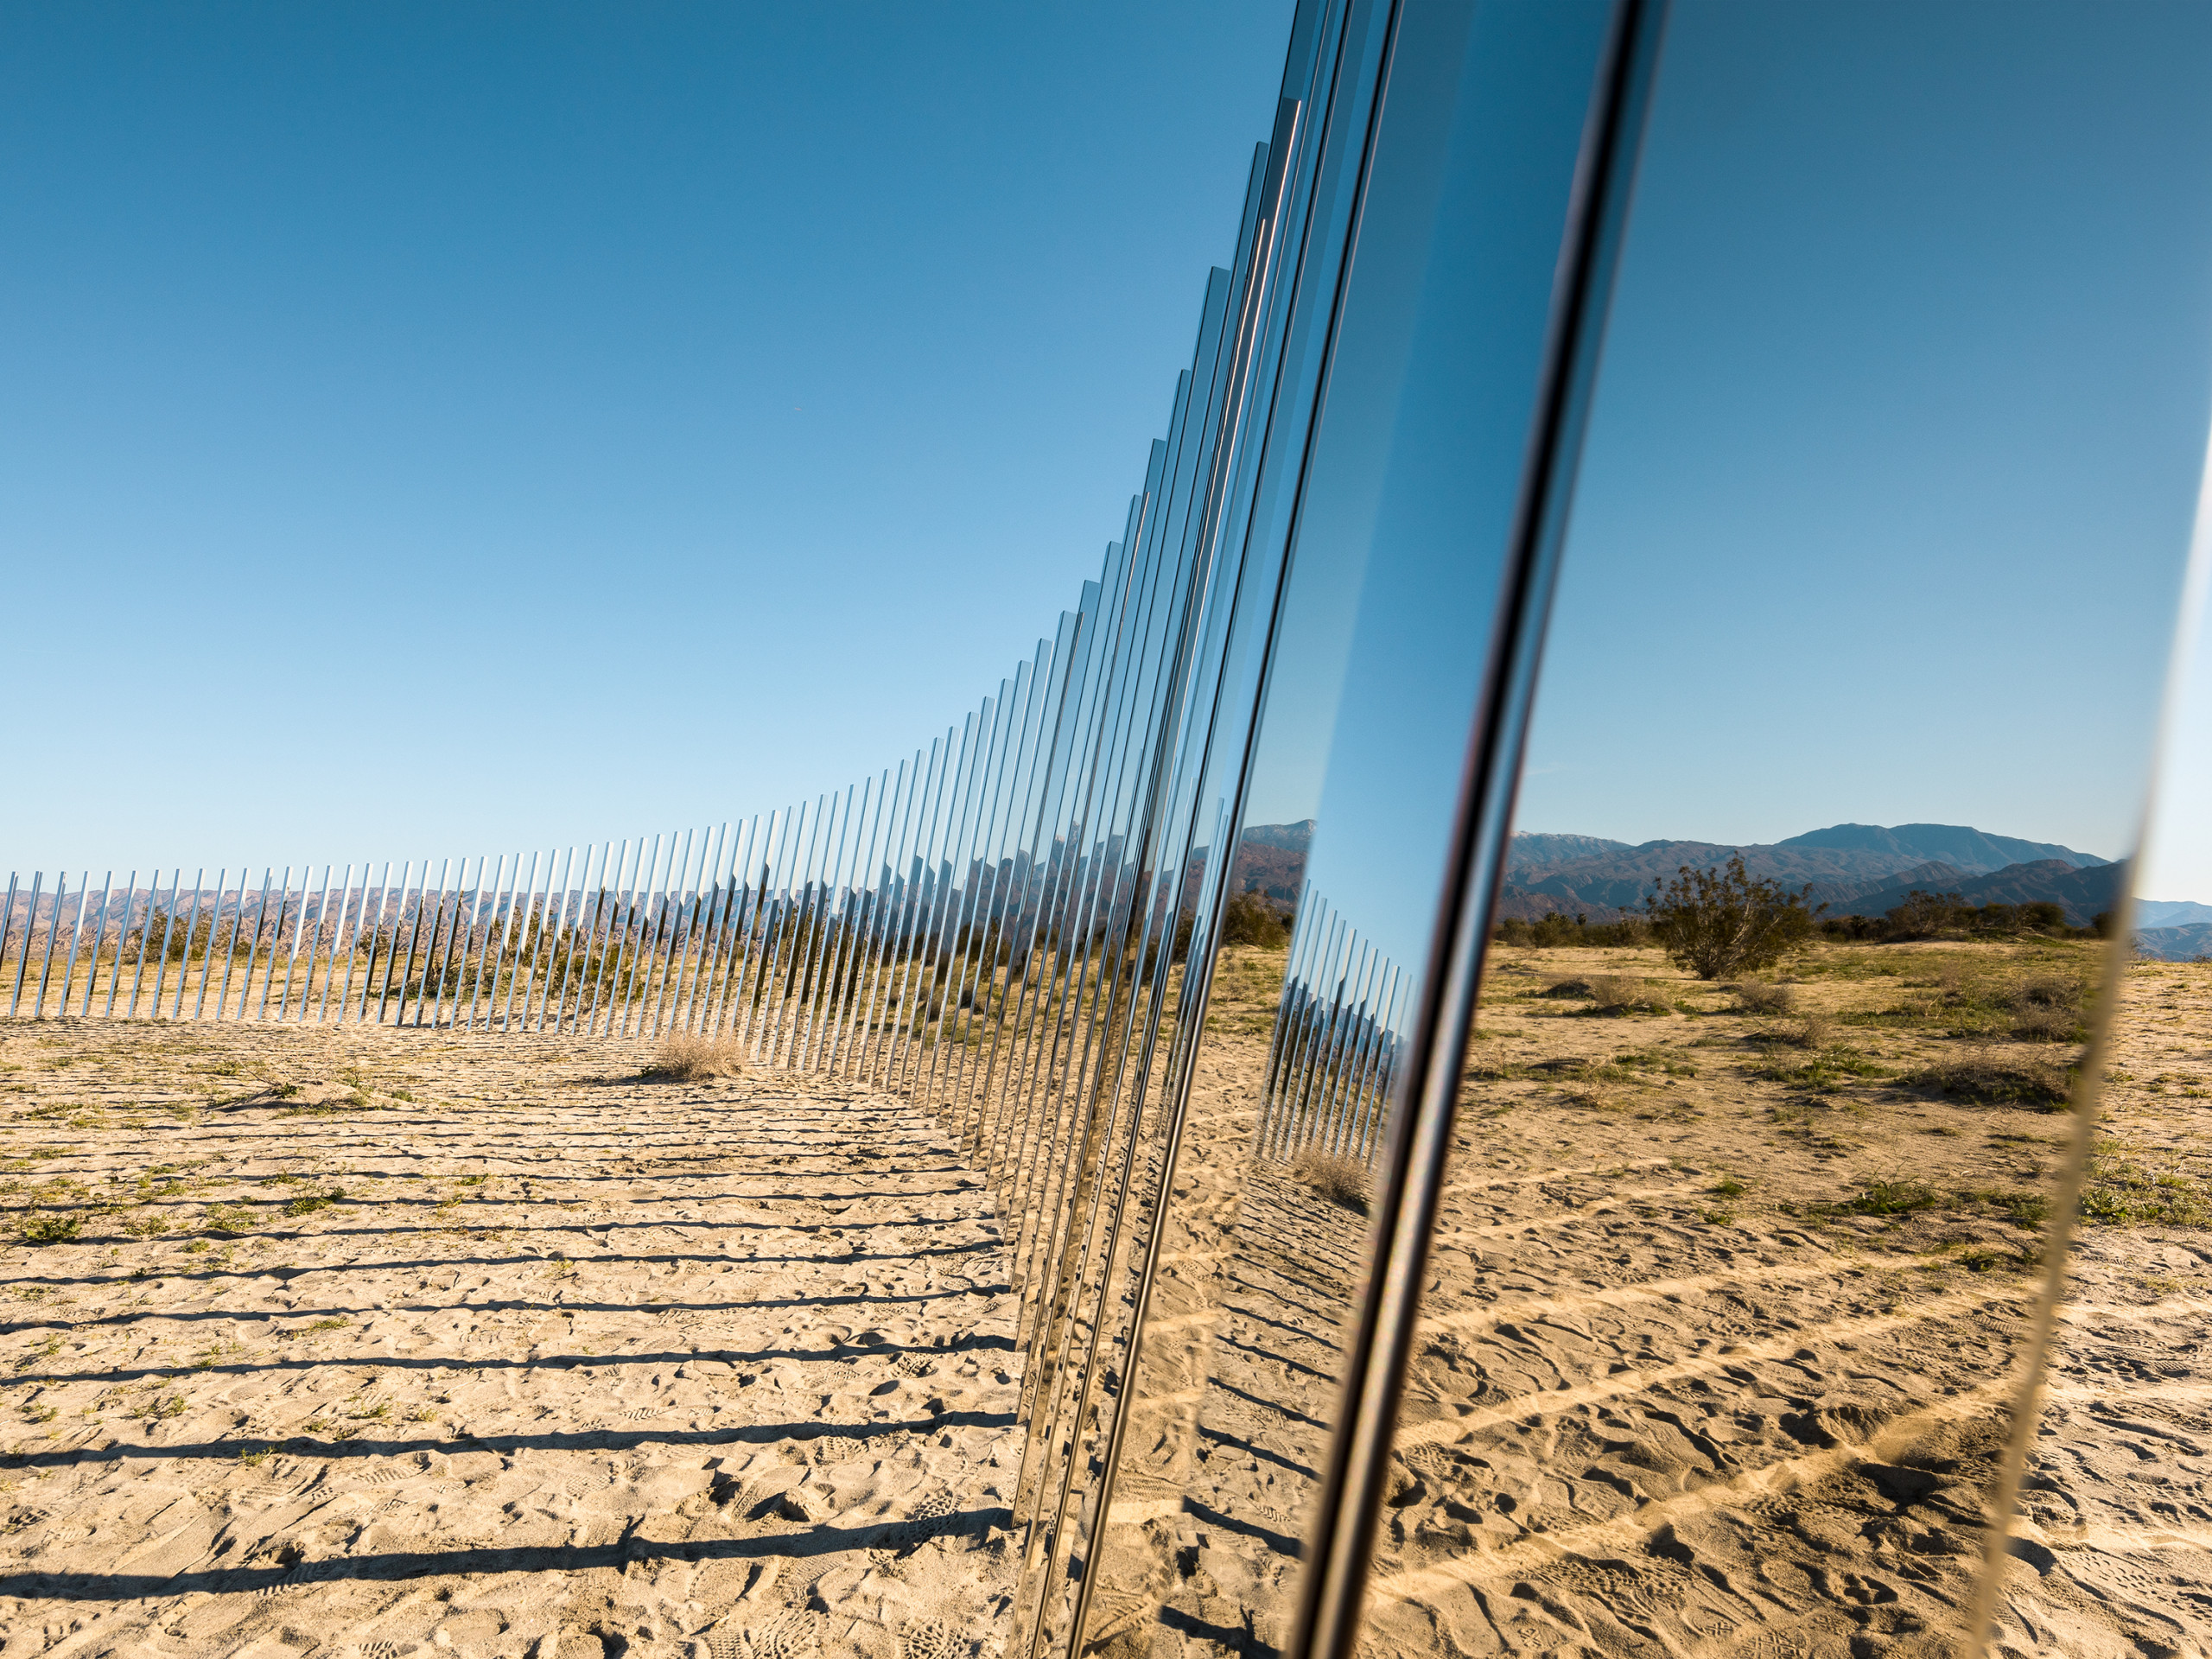 Phillip K Smith III
The Circle of Land and Sky
Desert X 2017